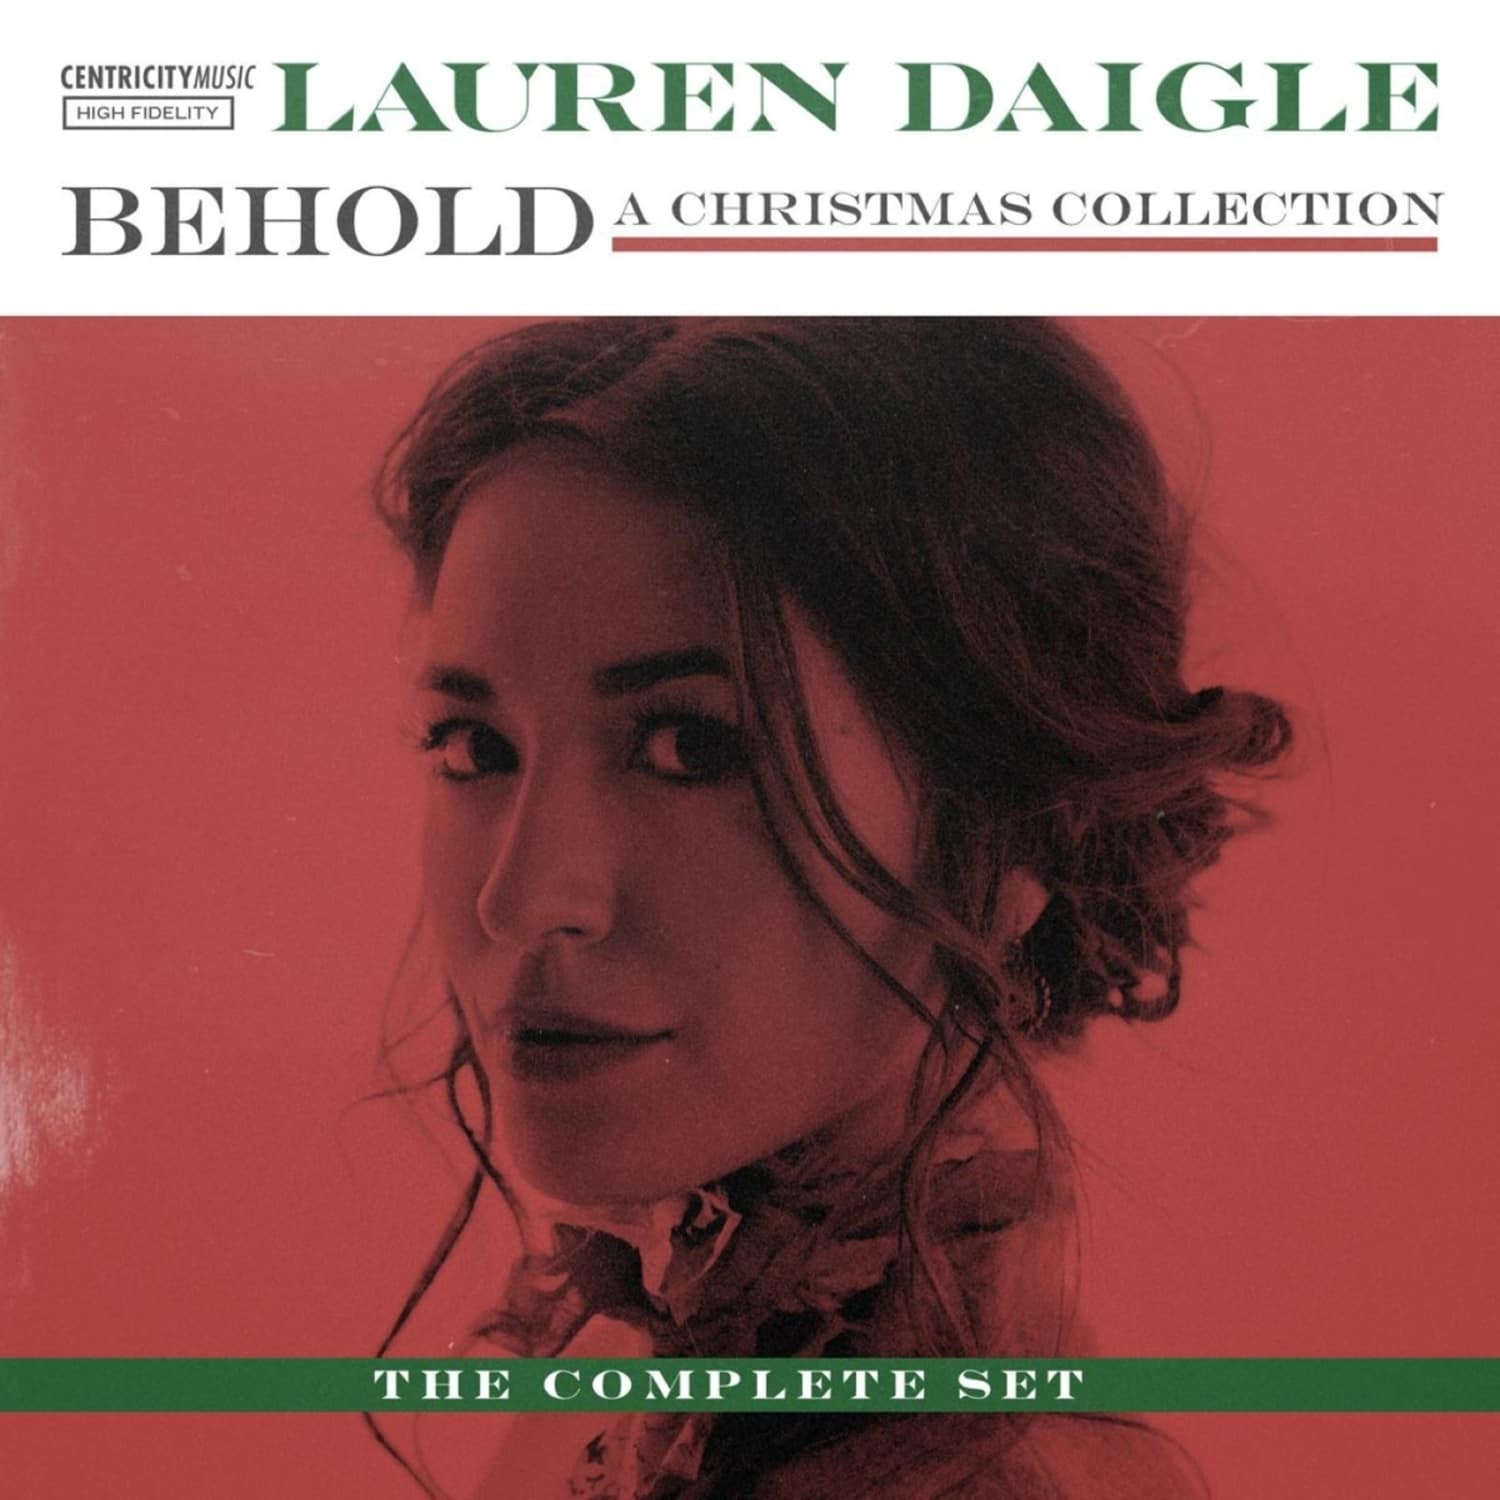  Lauren Daigle - BEHOLD:THE COMPLETE SET-A CHRISTMAS COLLECTION 